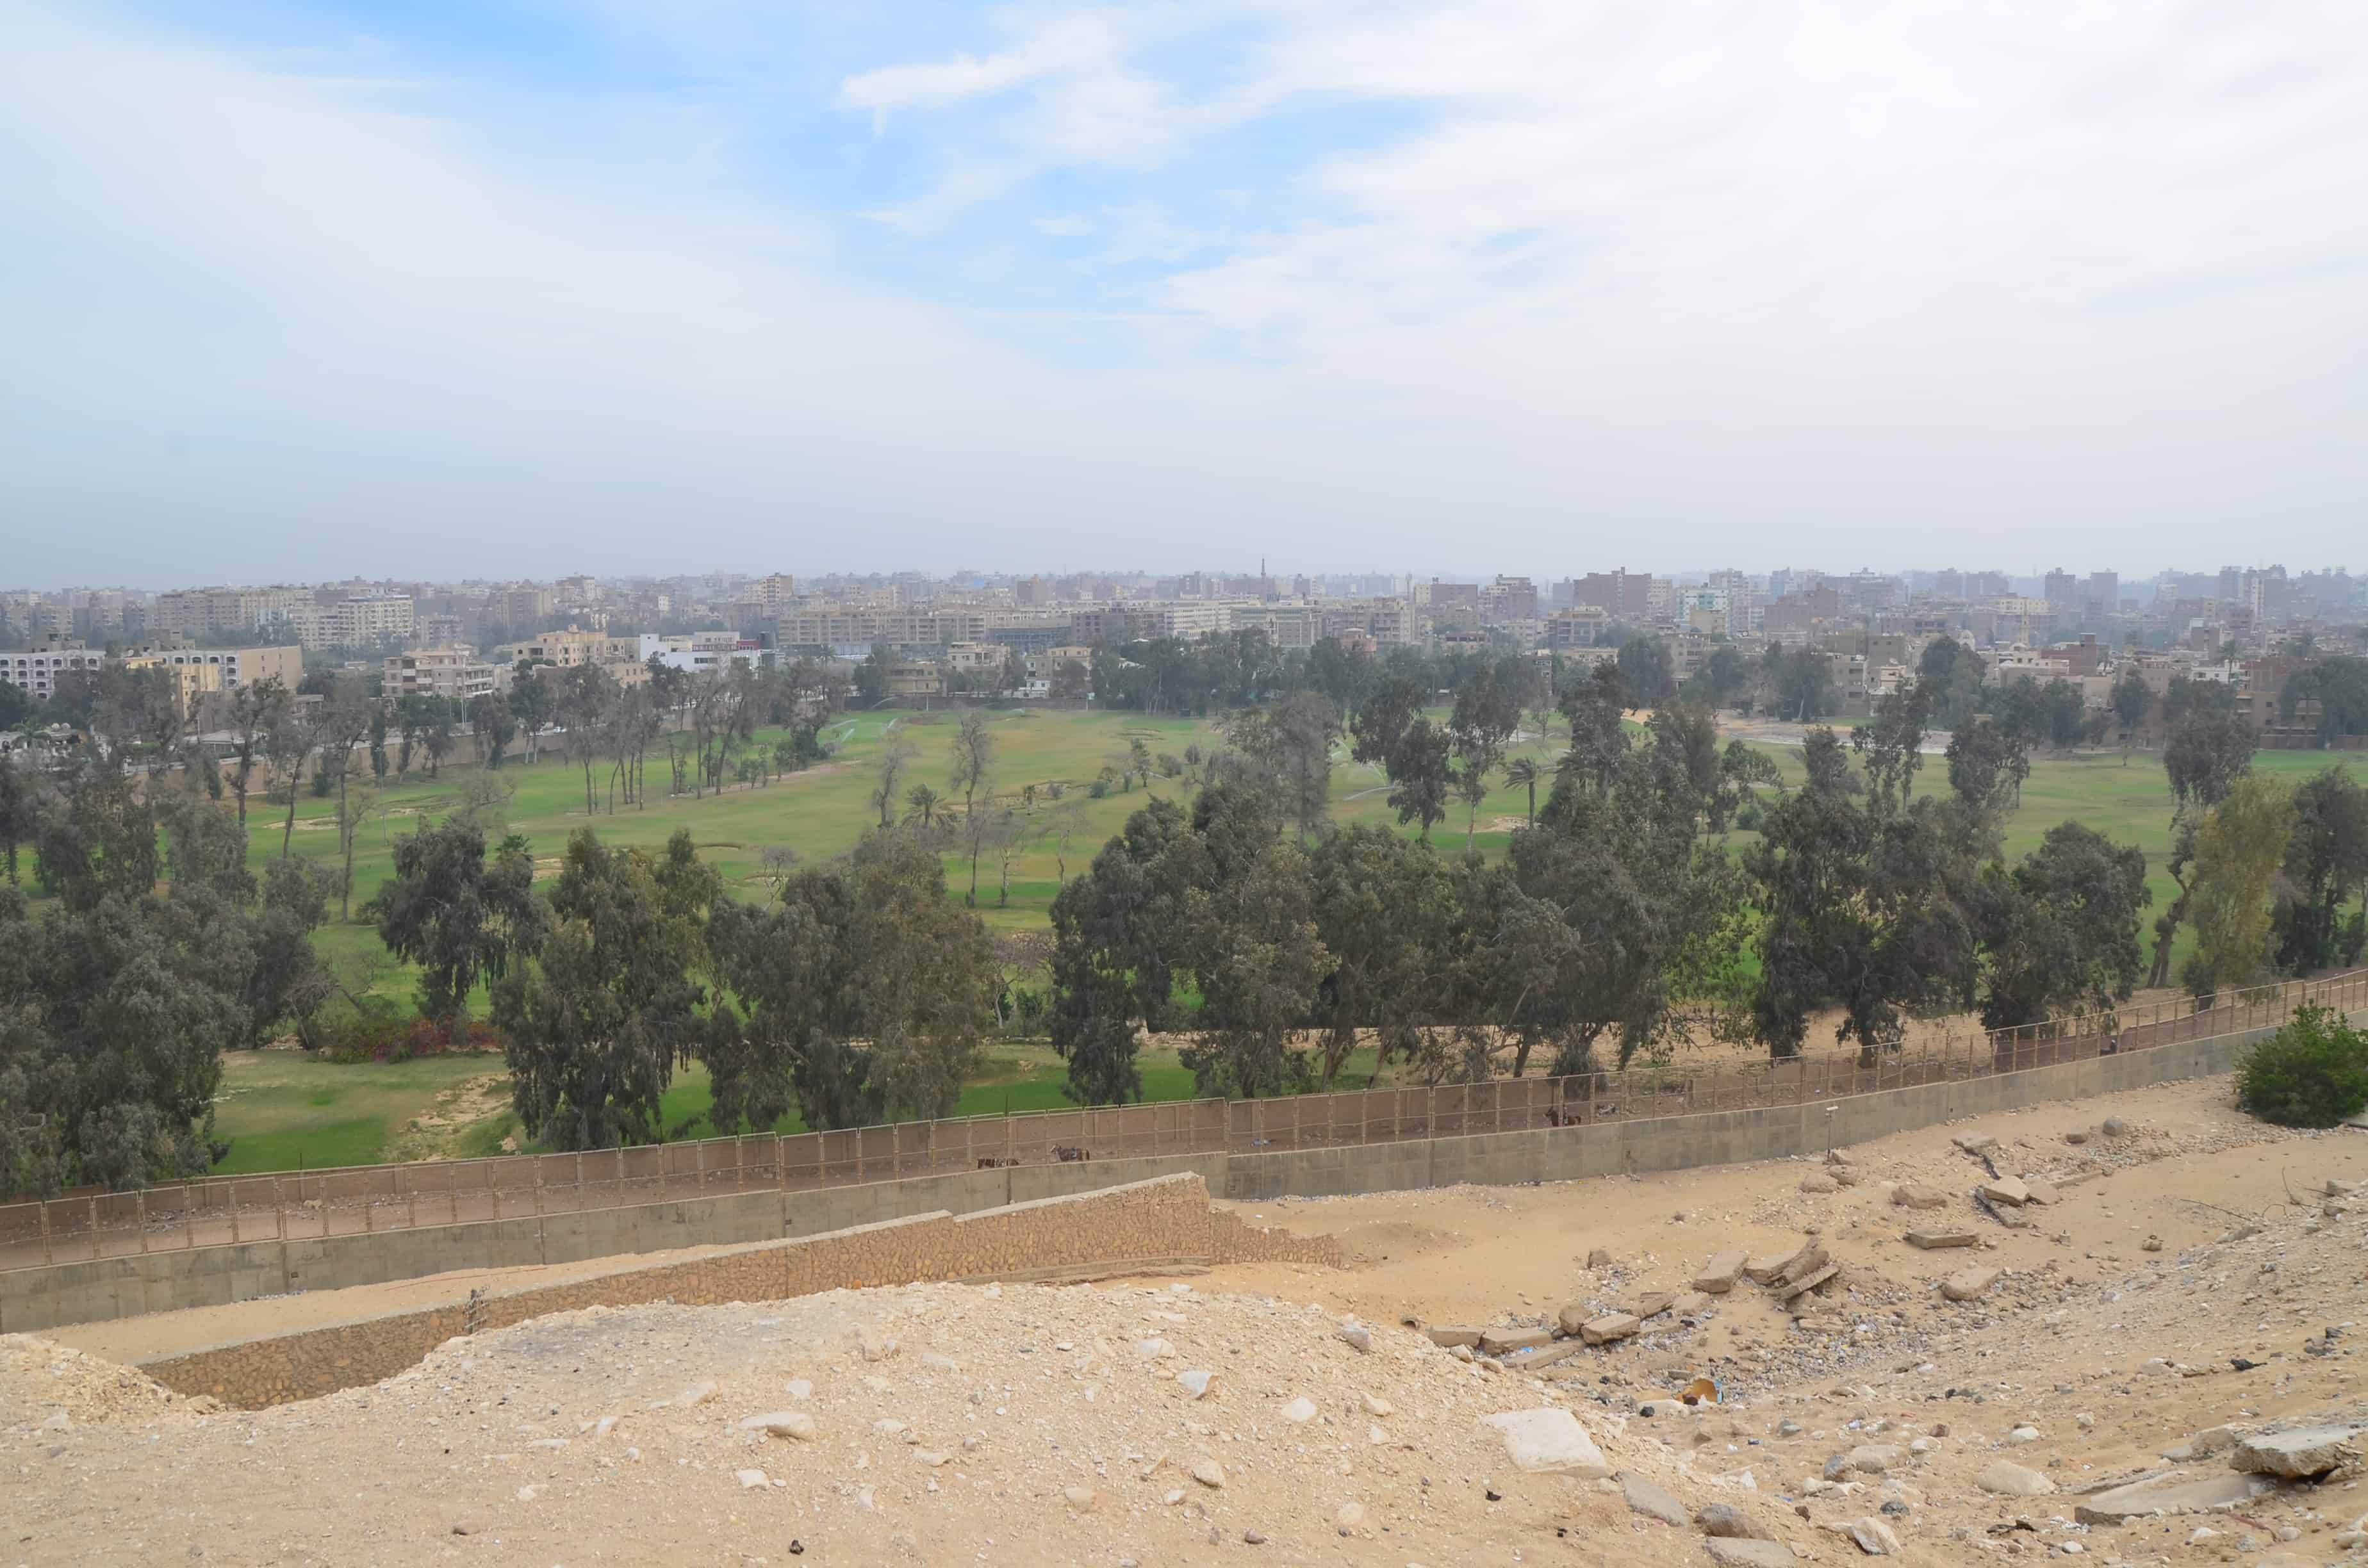 View of Cairo from the Pyramids of Giza in Egypt